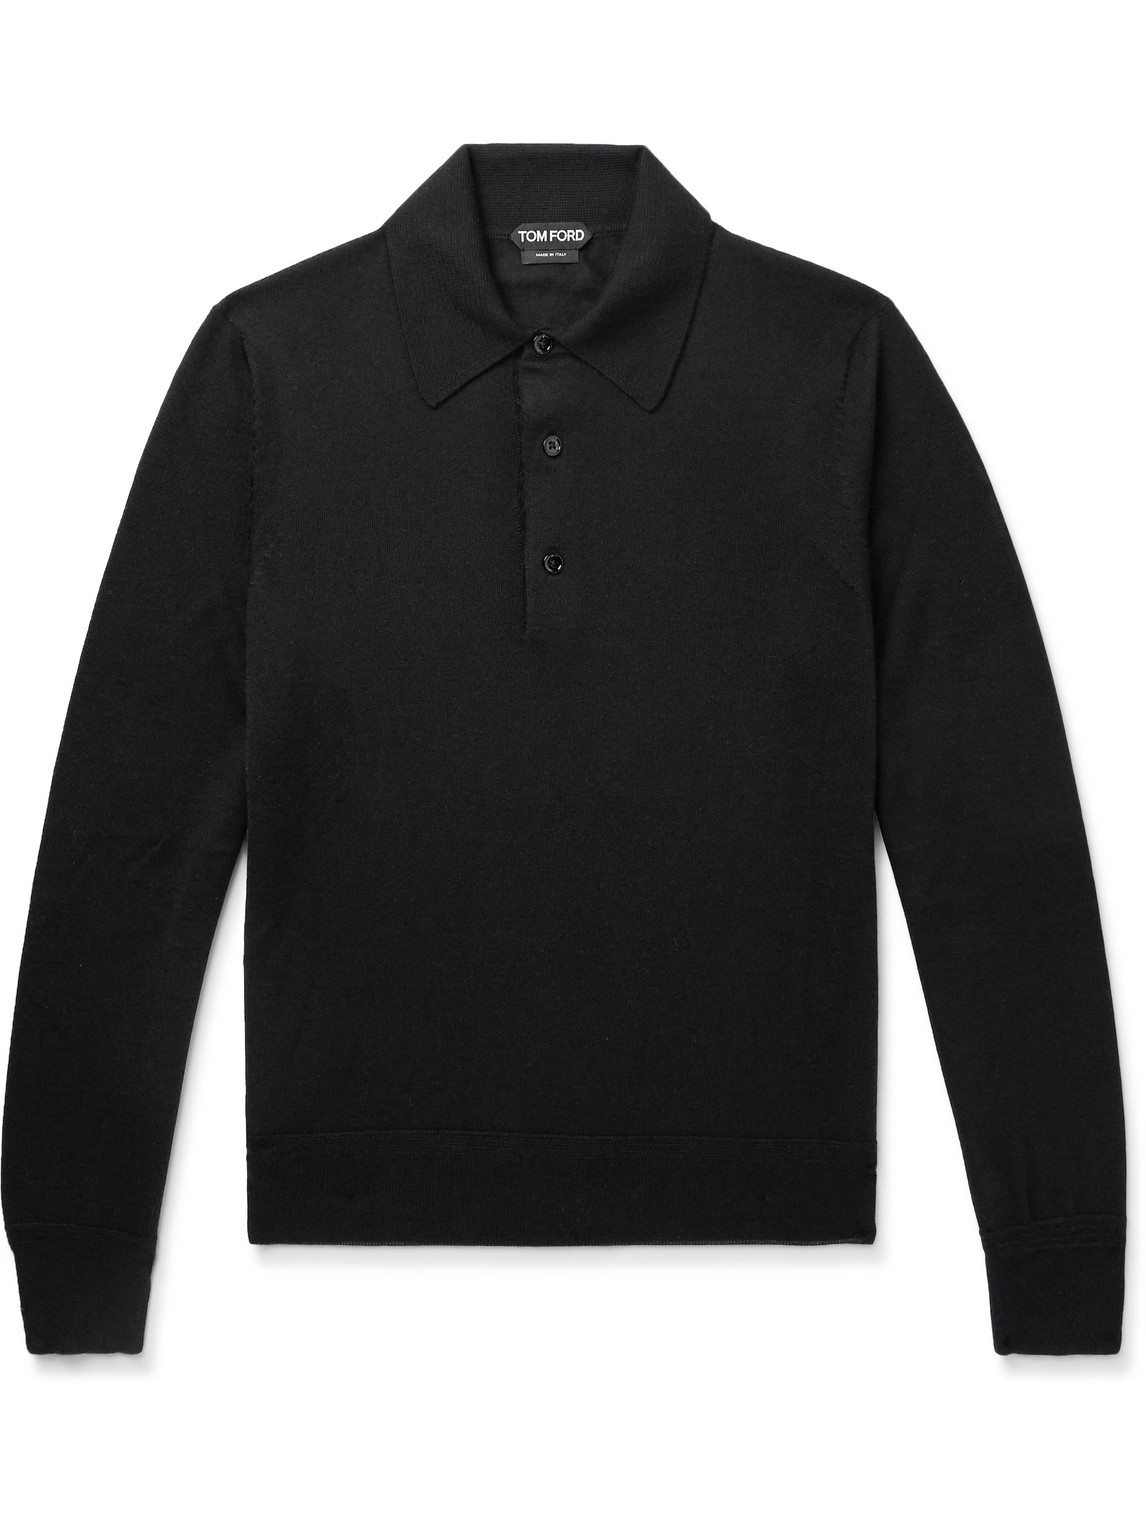 TOM FORD - Slim-Fit Cashmere and Silk-Blend Polo Shirt - Men - Black - IT 46 von TOM FORD